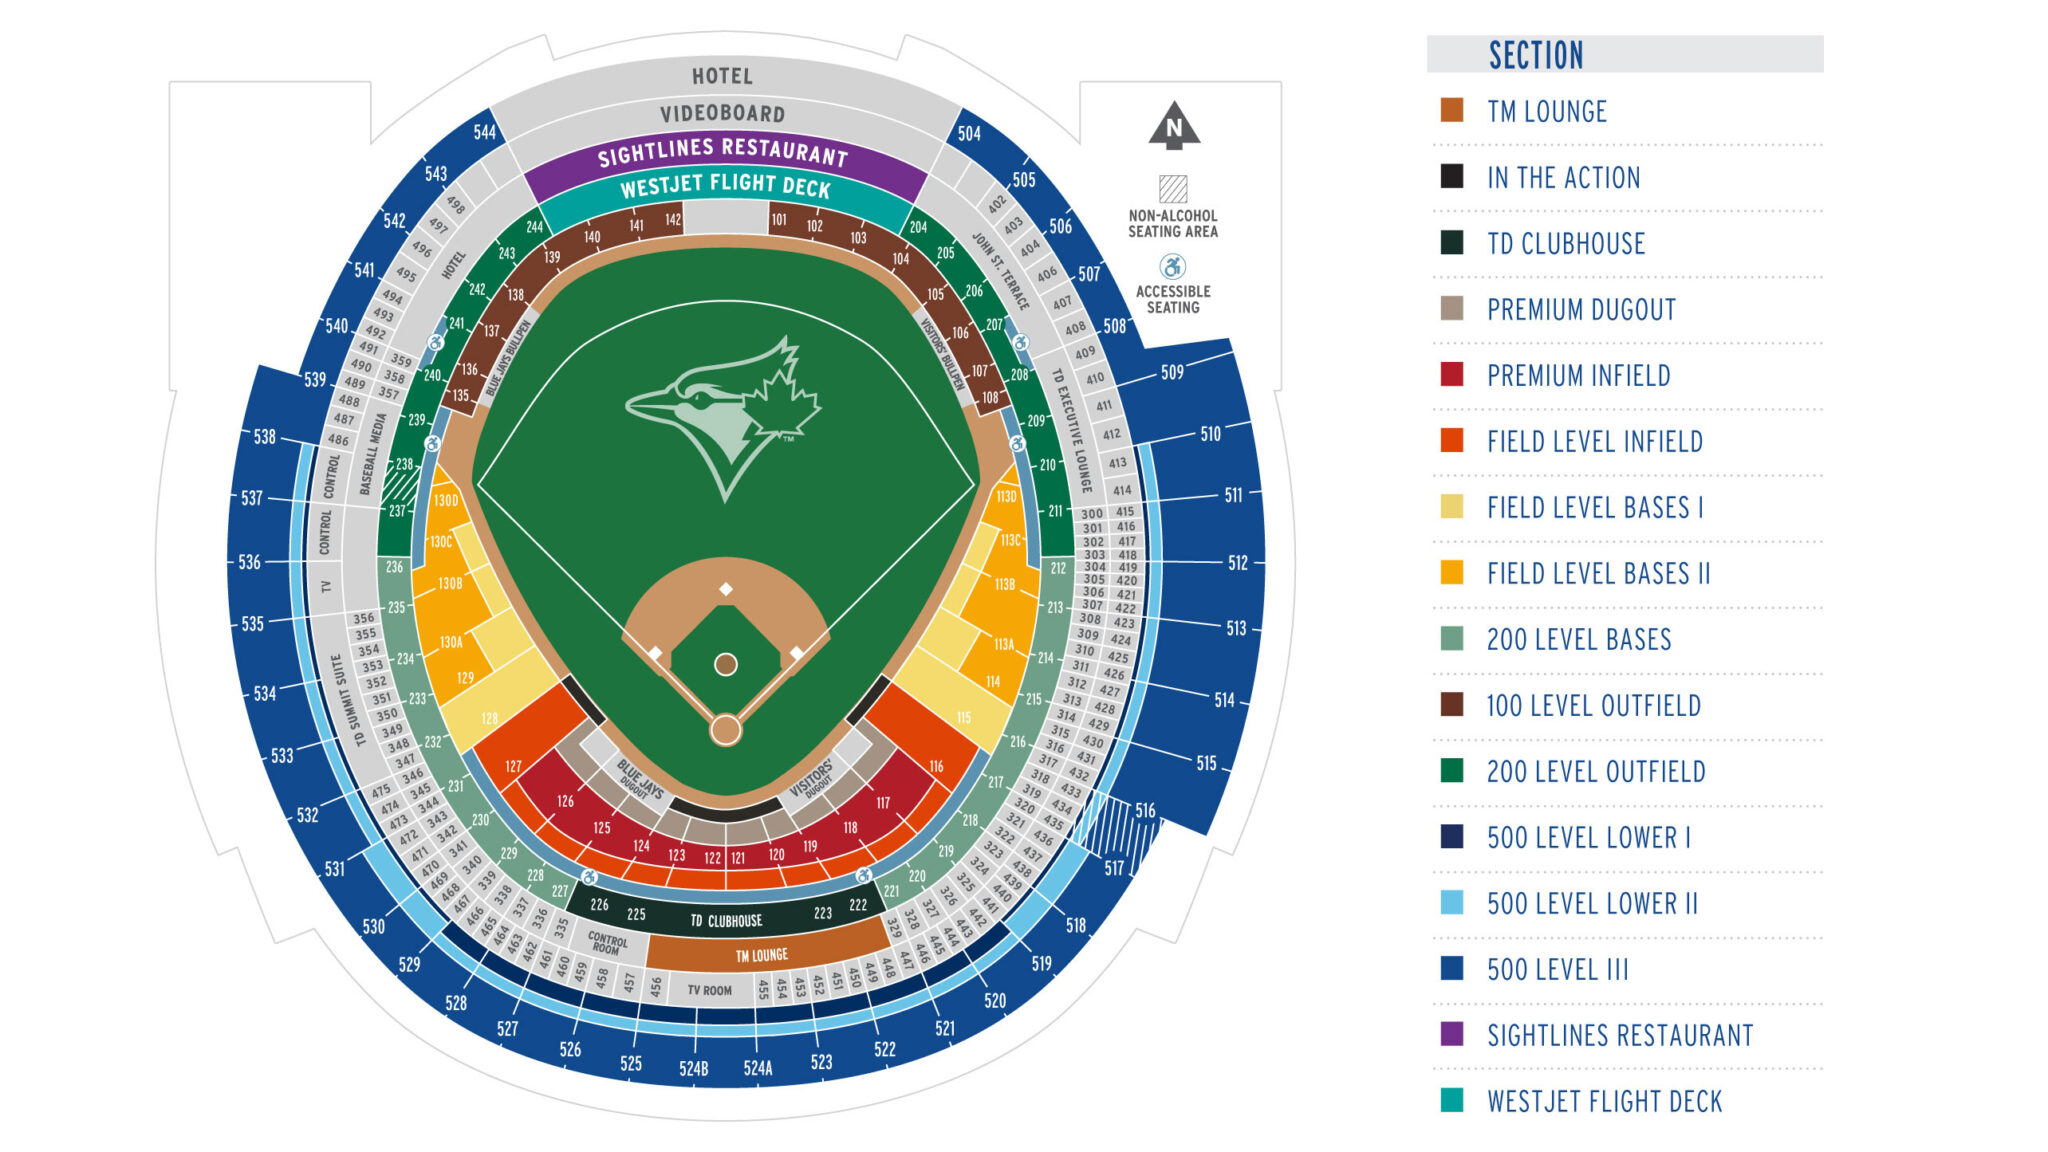 Rogers Centre Seating Plan Seating plans of Sport arenas around the World